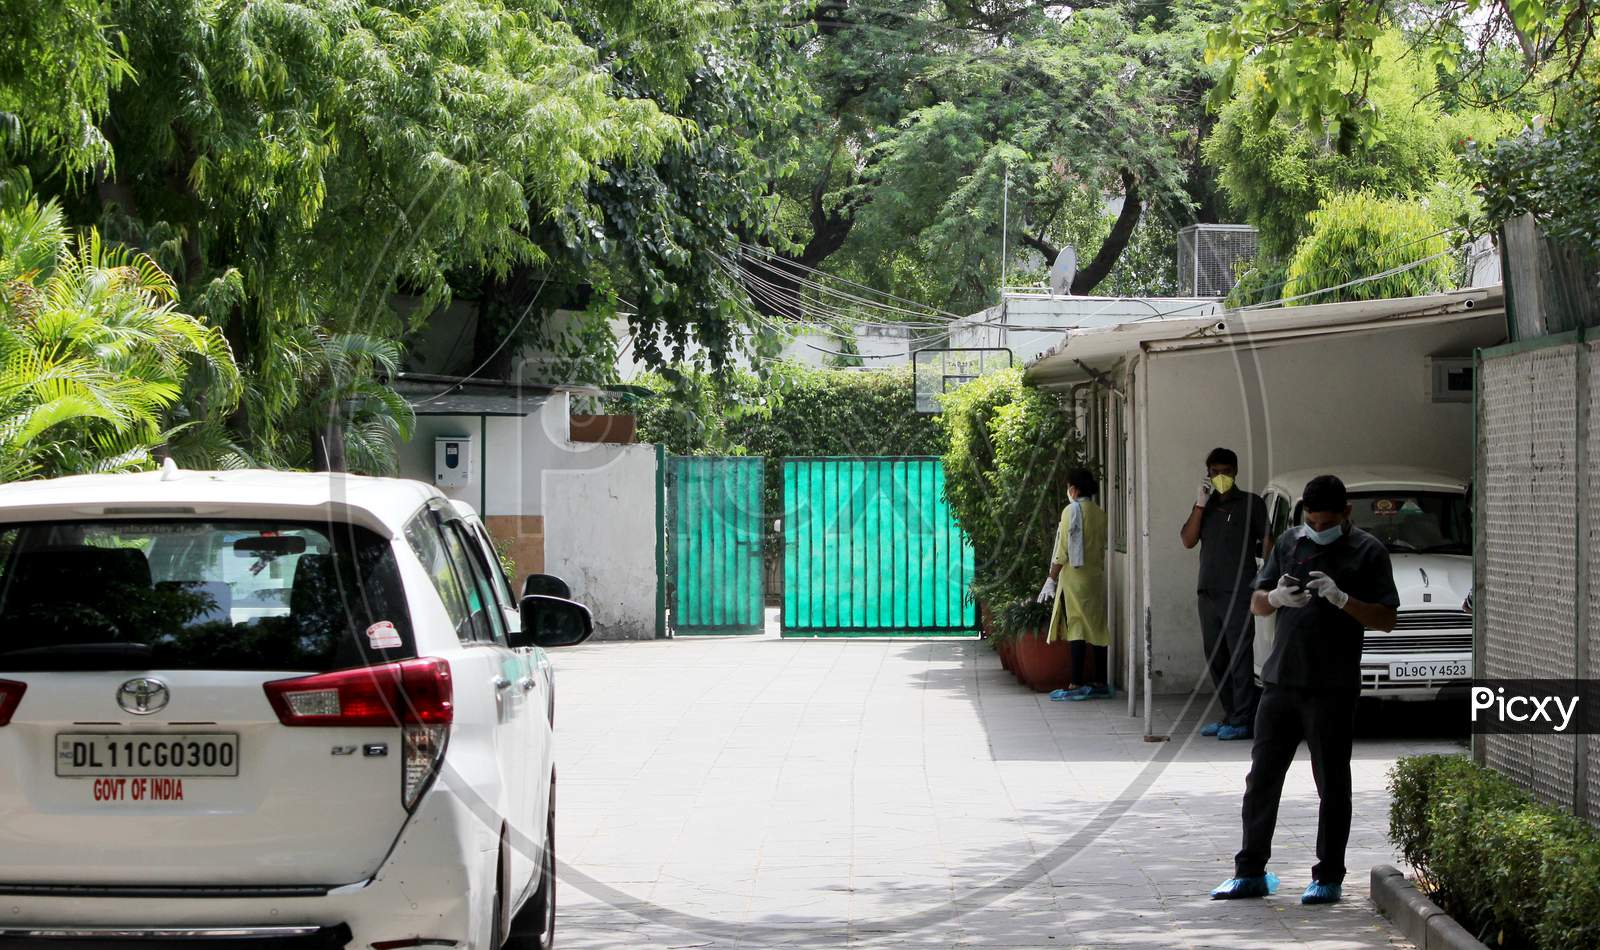 Congress leader Ahmed Patel's residence